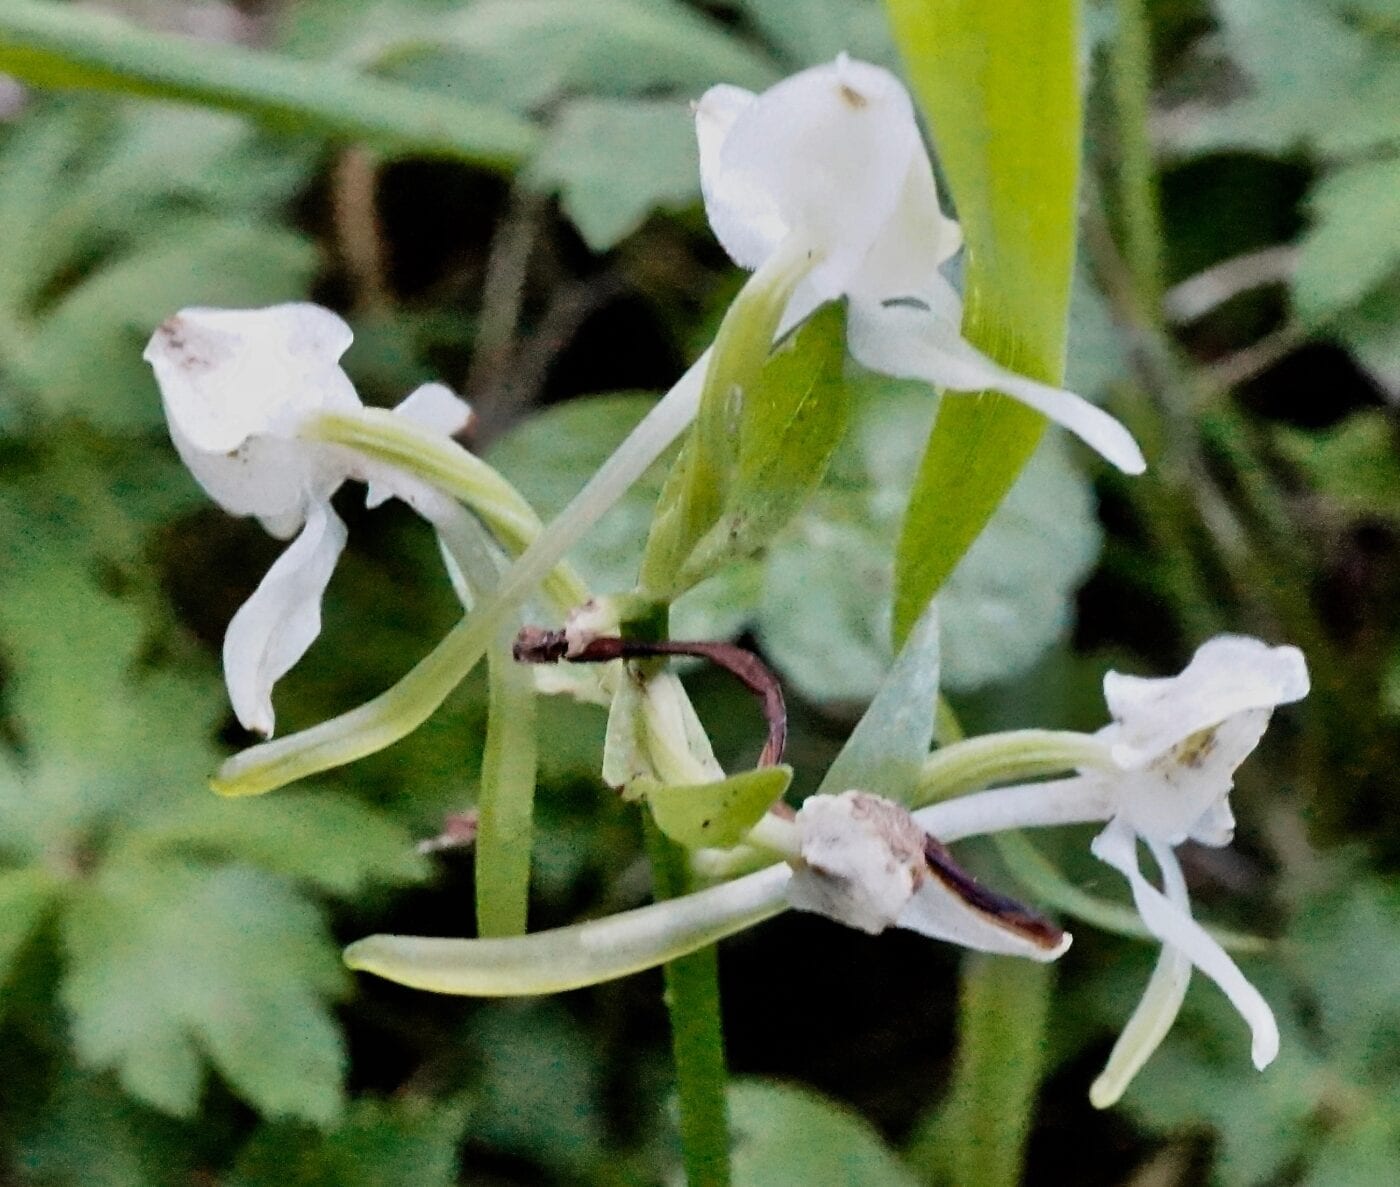 Greater Butterfly Orchid spurs